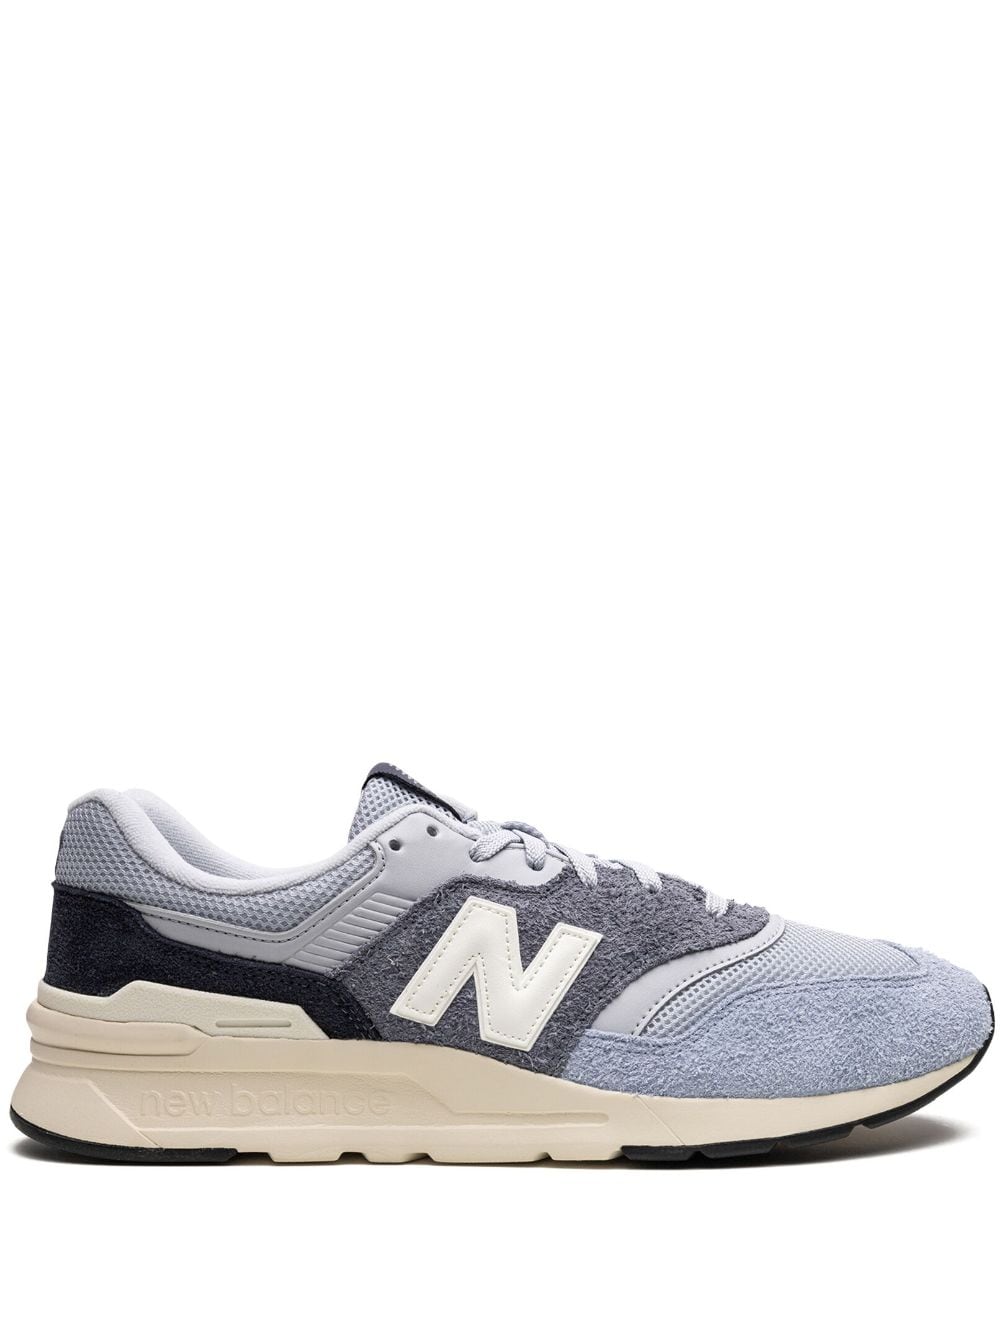 New Balance 997H "Light Artic Grey Outerspace" sneakers von New Balance